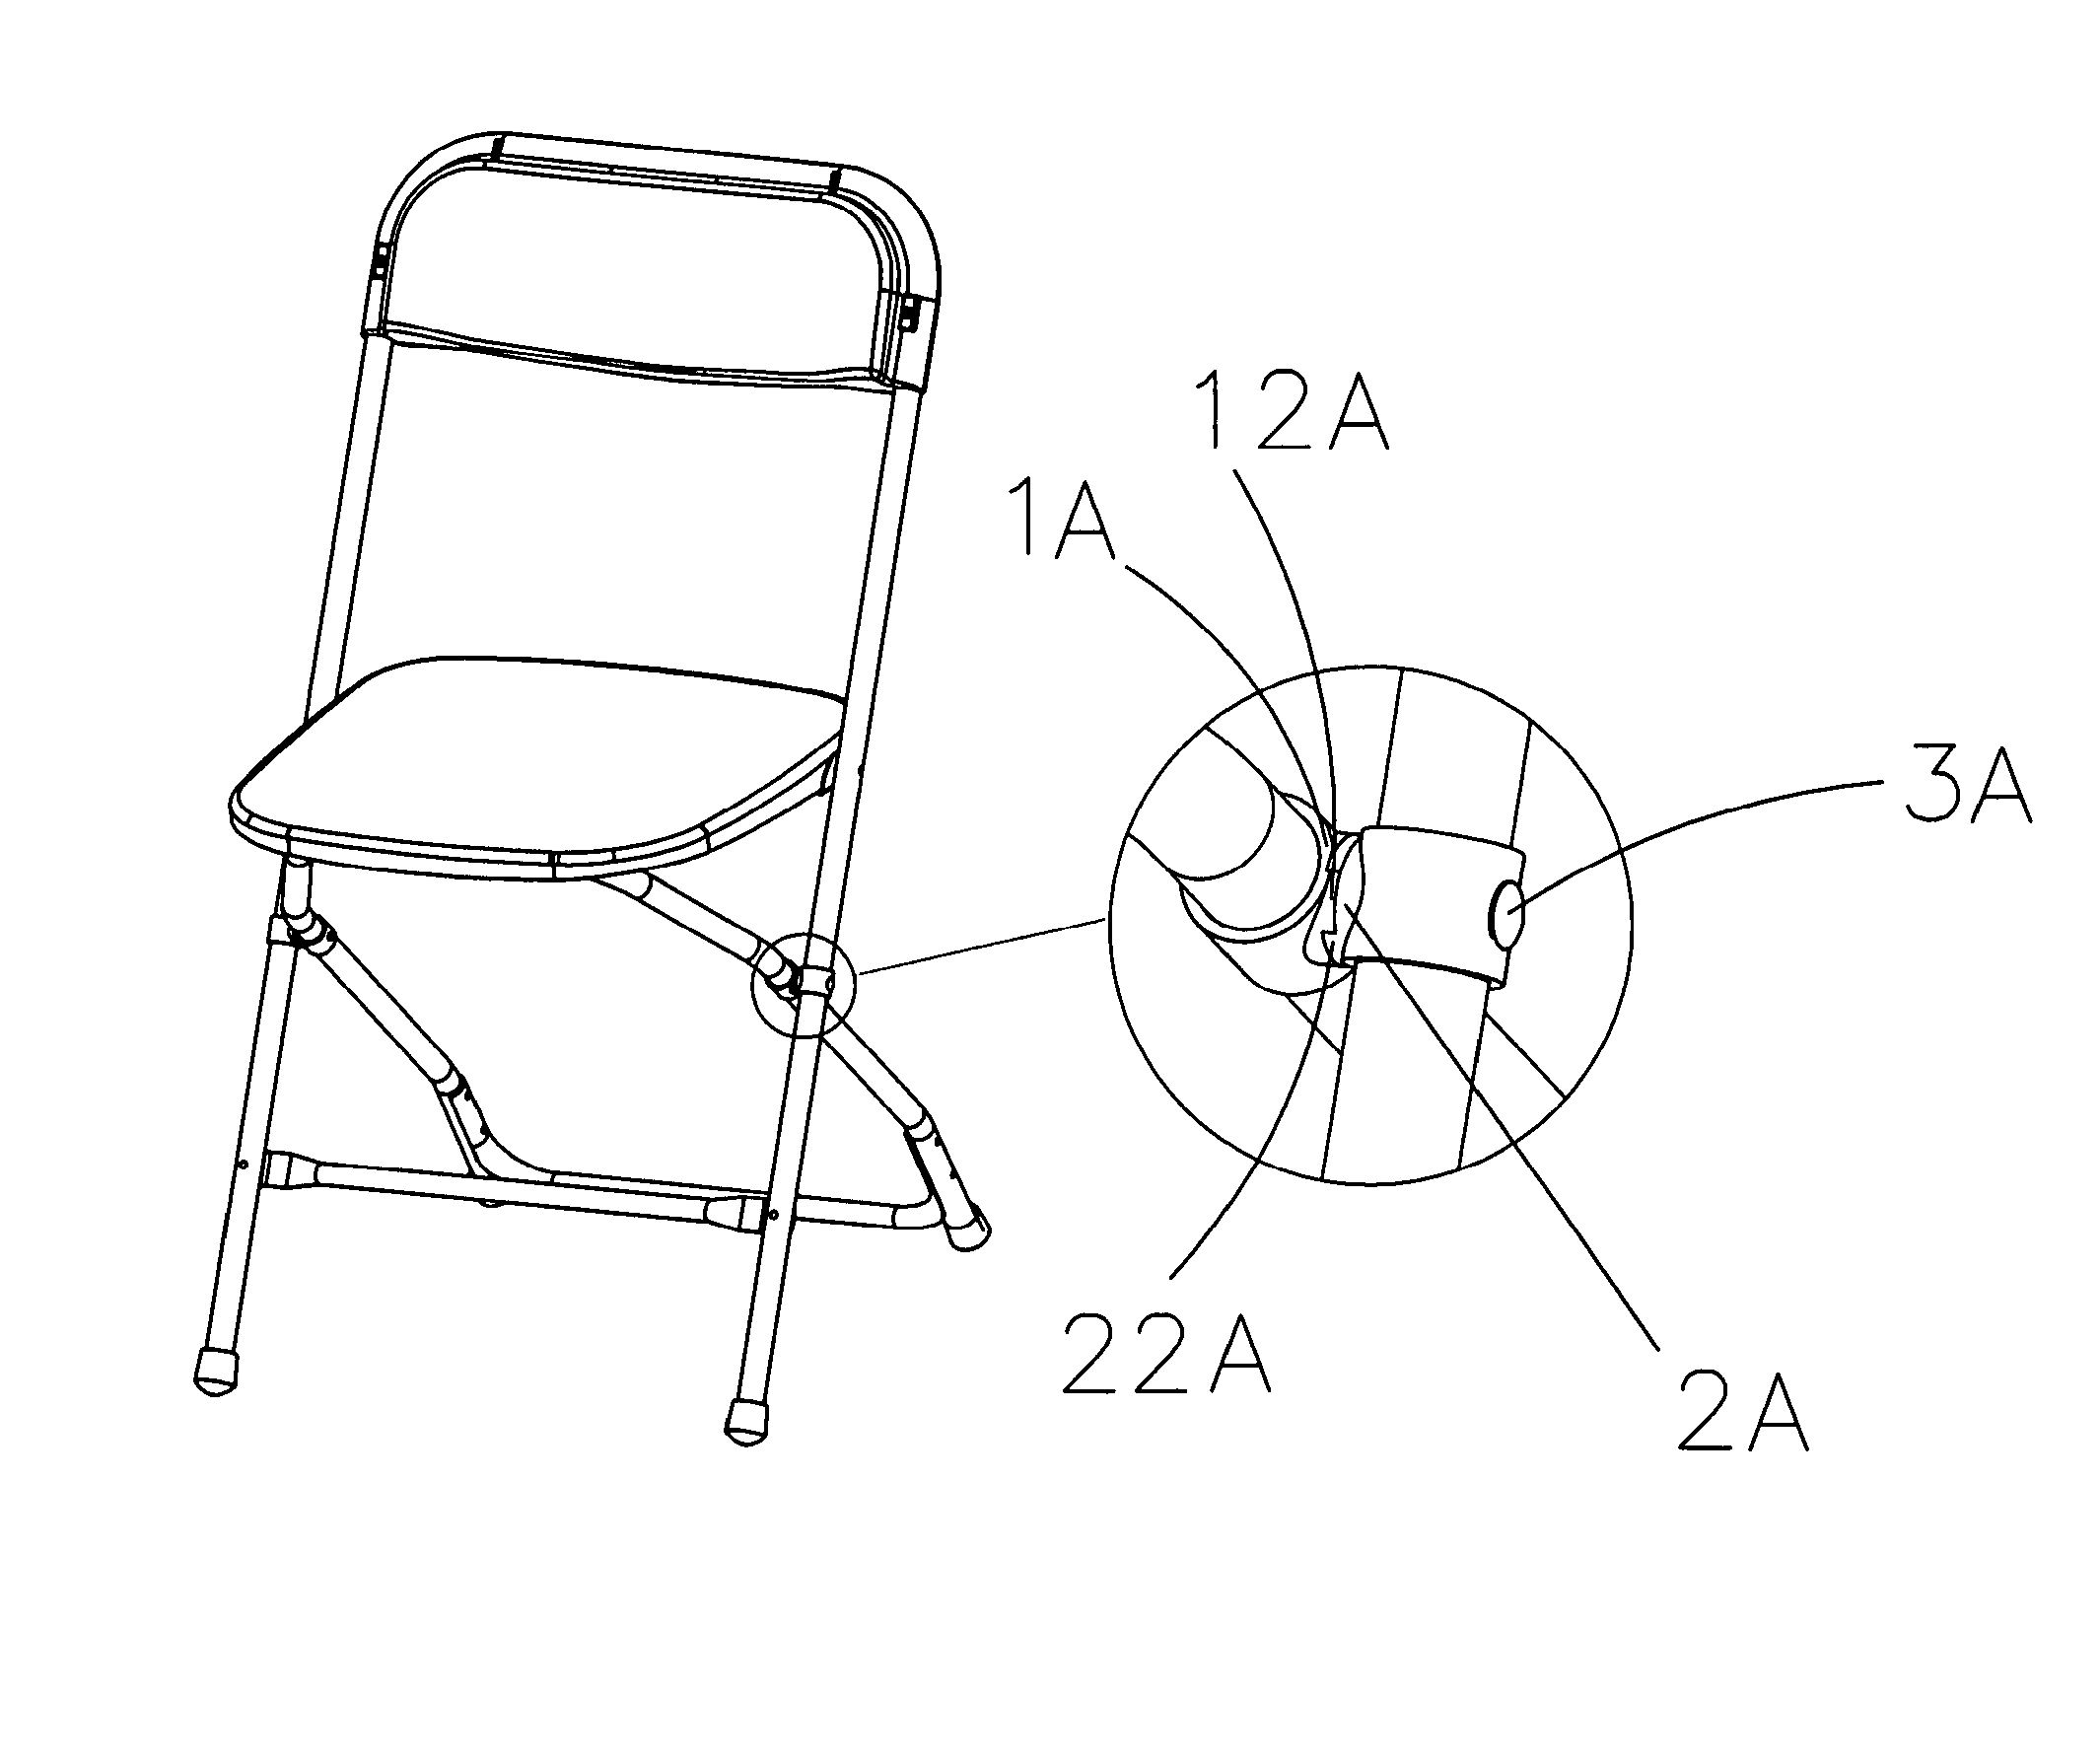 Foldable furniture with retention structure